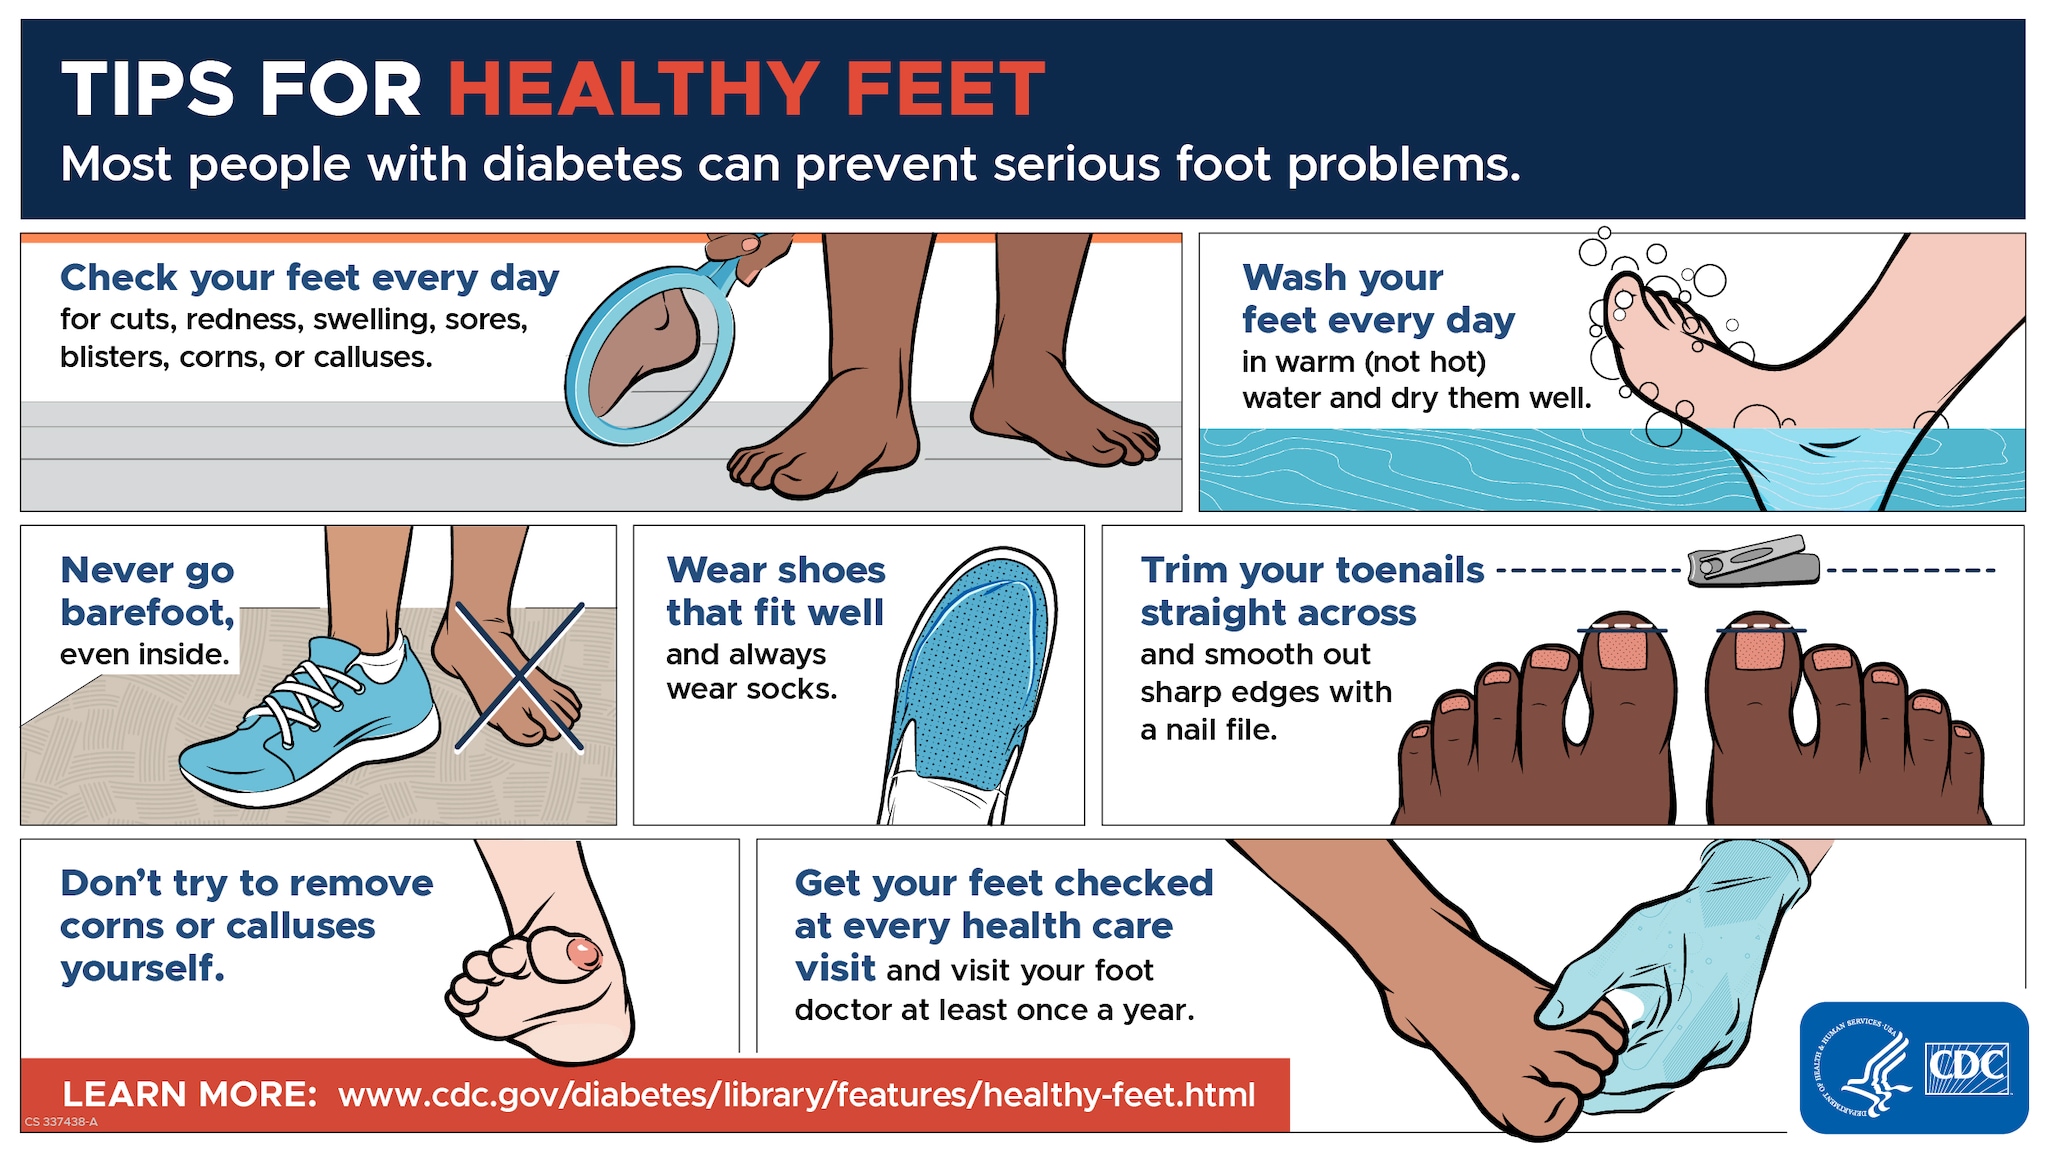 https://www.cdc.gov/diabetes/images/library/337438-A_FOOT_CARE_1200x675_Twitter_3.24.jpg